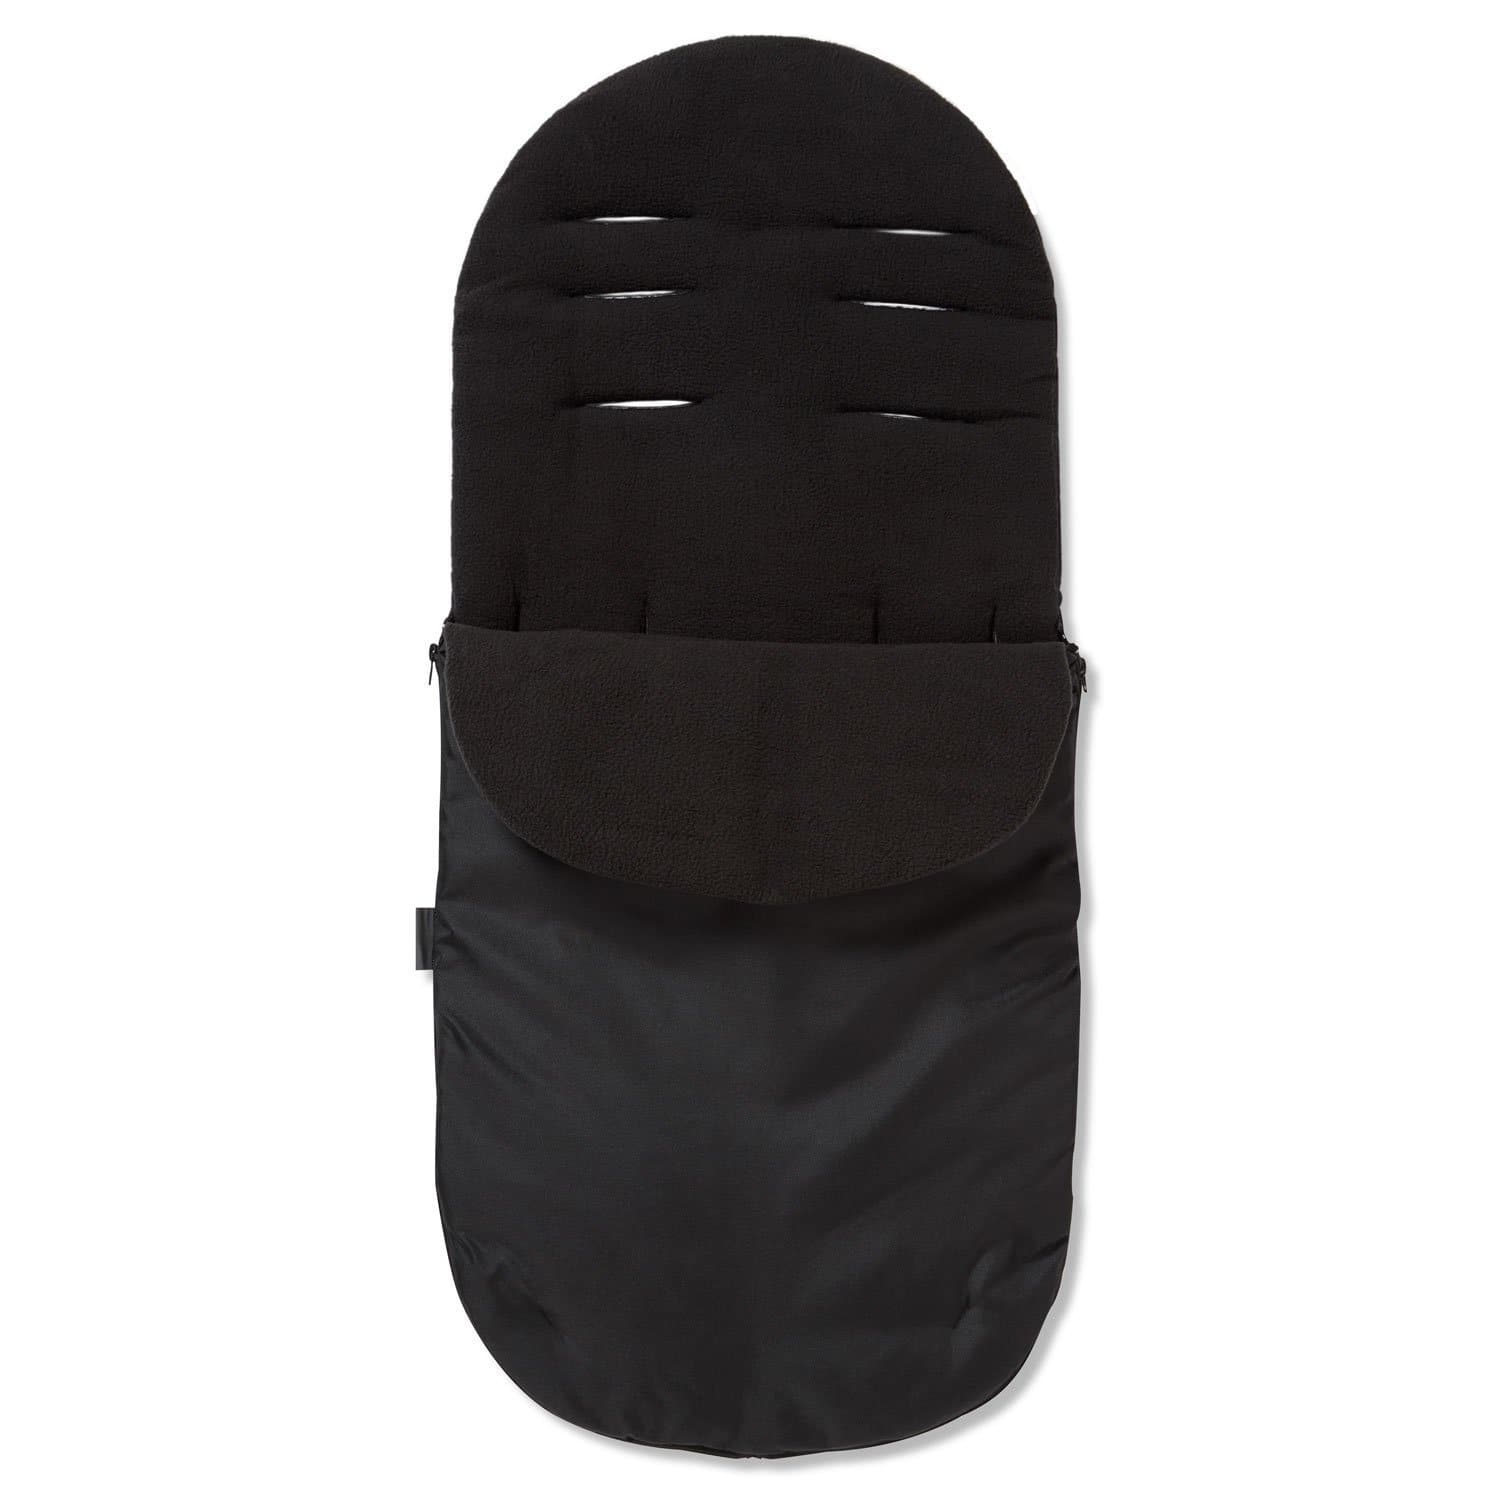 Footmuff / Cosy Toes Compatible with Mamas & Papas - Black / Fits All Models | For Your Little One